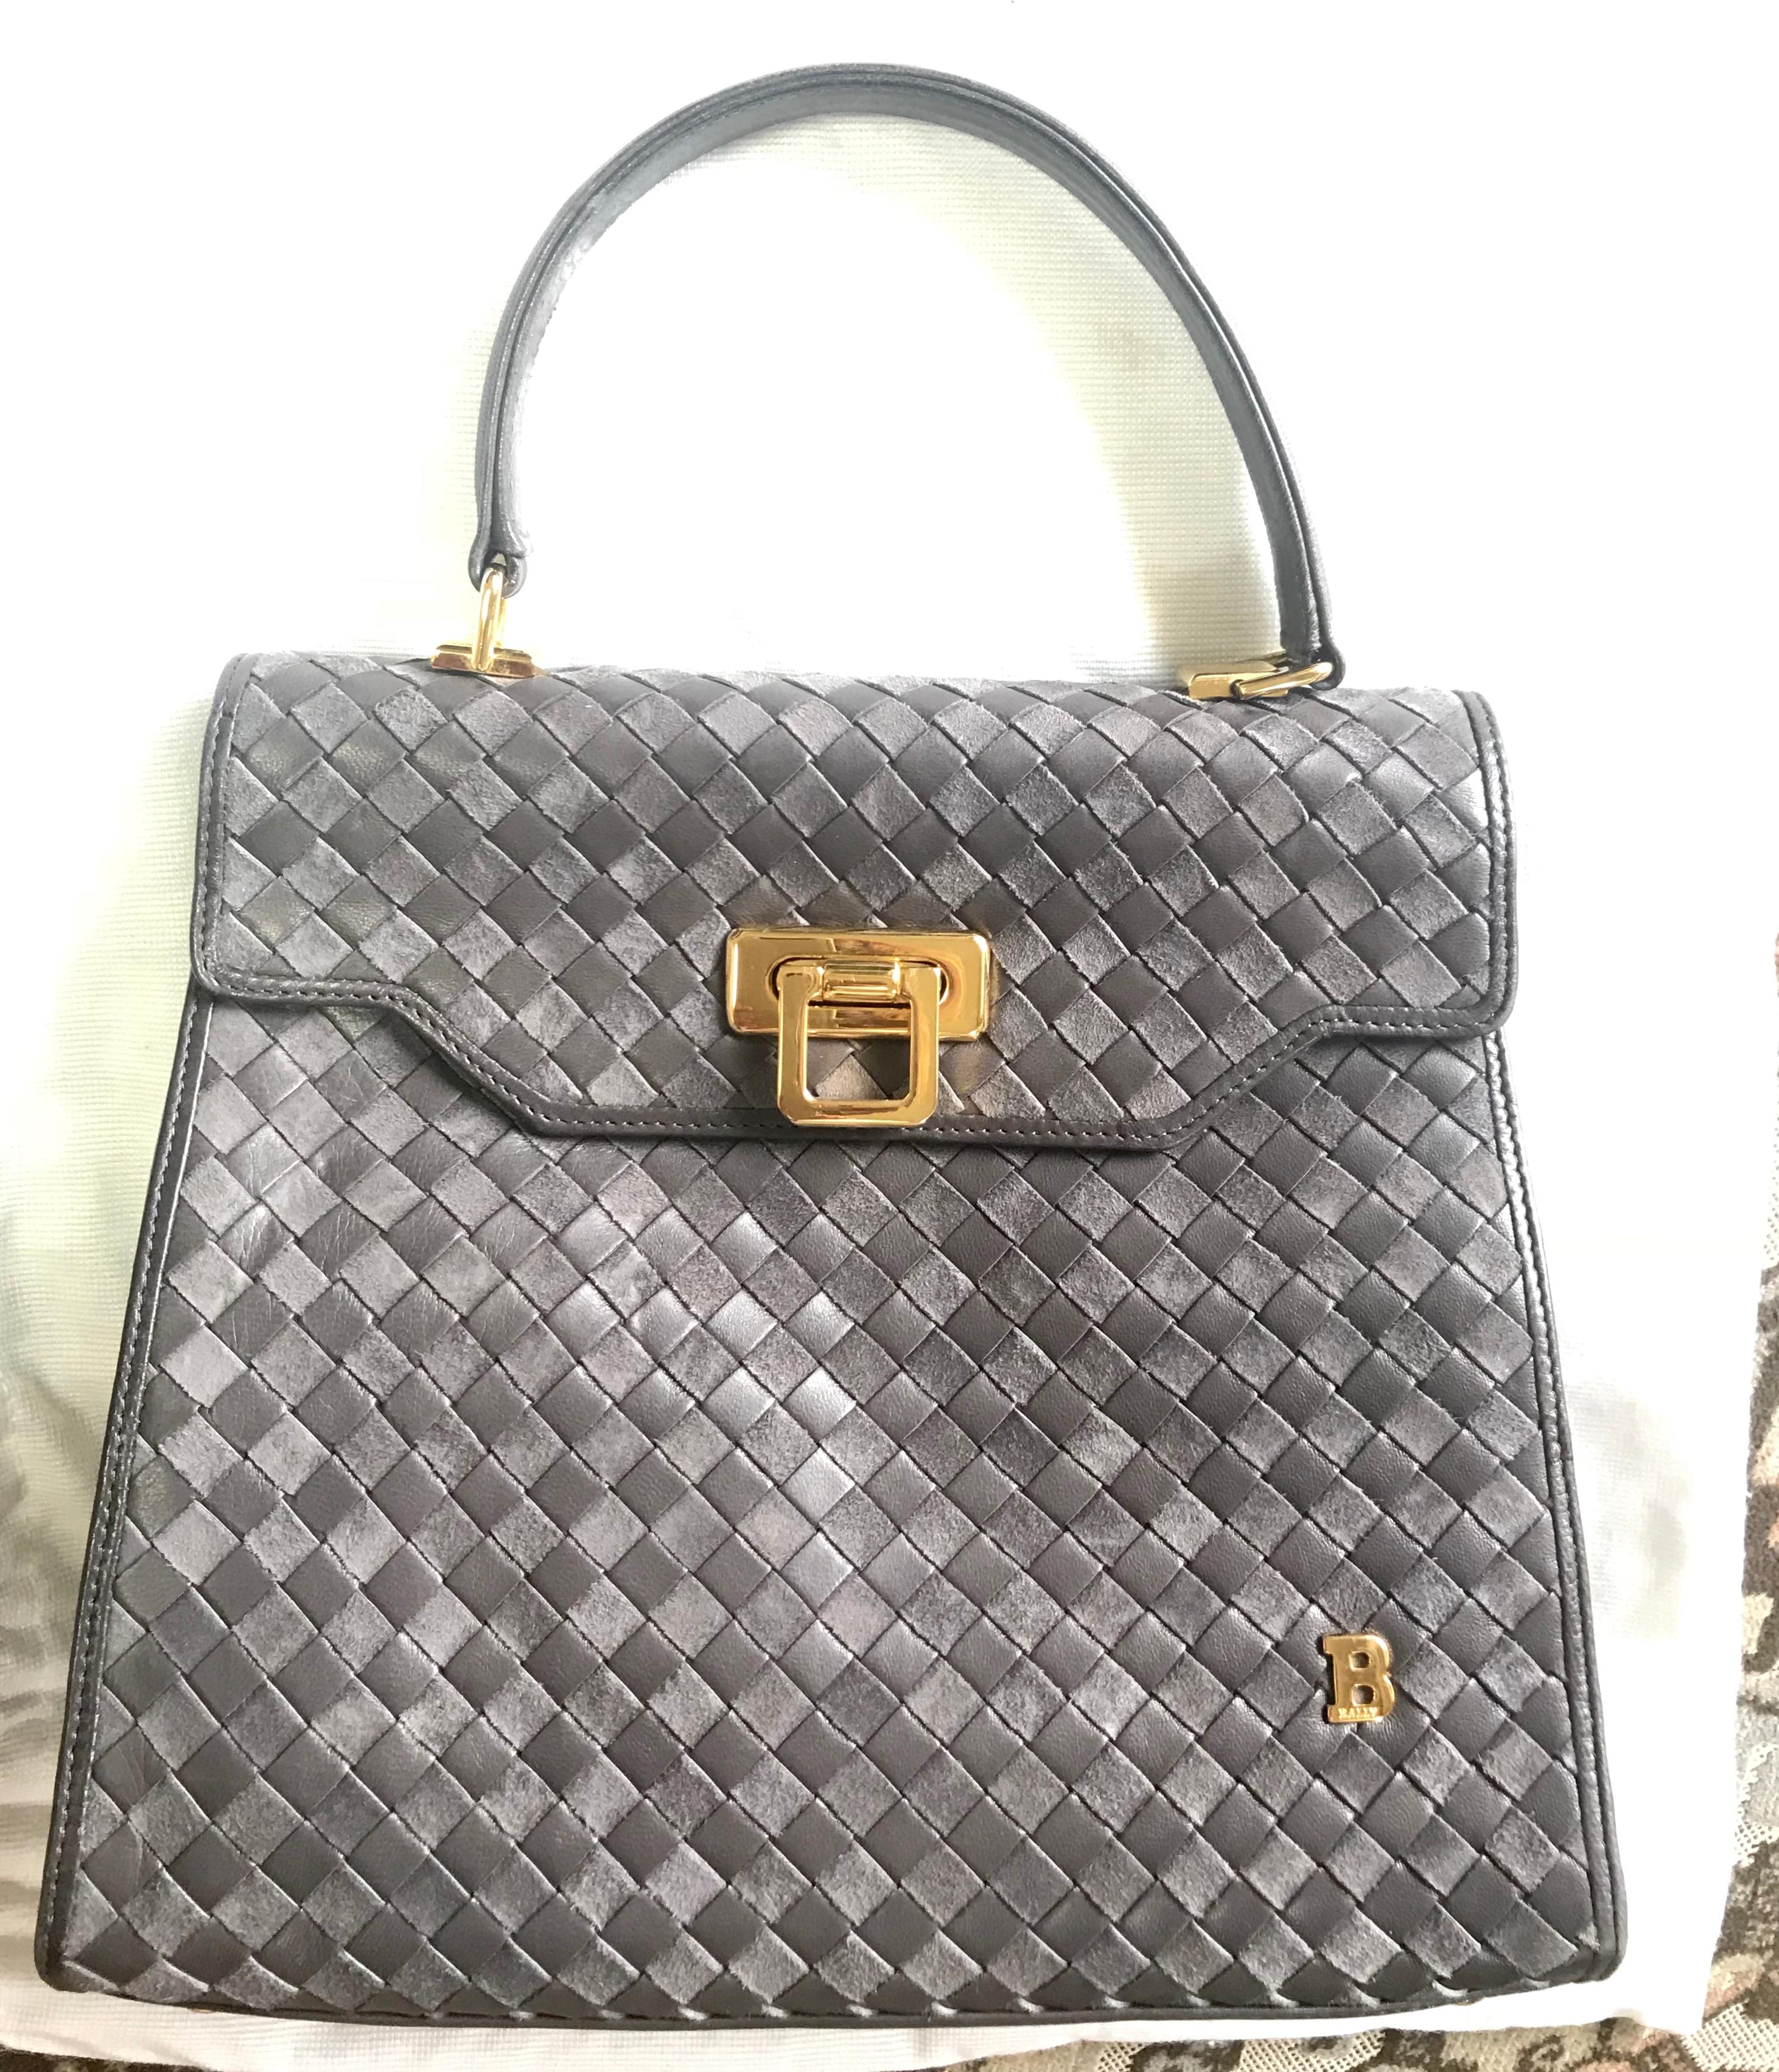 1990s. Vintage Bally taupe gray intrecciato leather handbag with gold tone closure in classic kelly style. Golden B logo. 
Masterpiece and classic bag.

Introducing a unique vintage purse in kelly style from BALLY in the early 90s.
One of the rarest